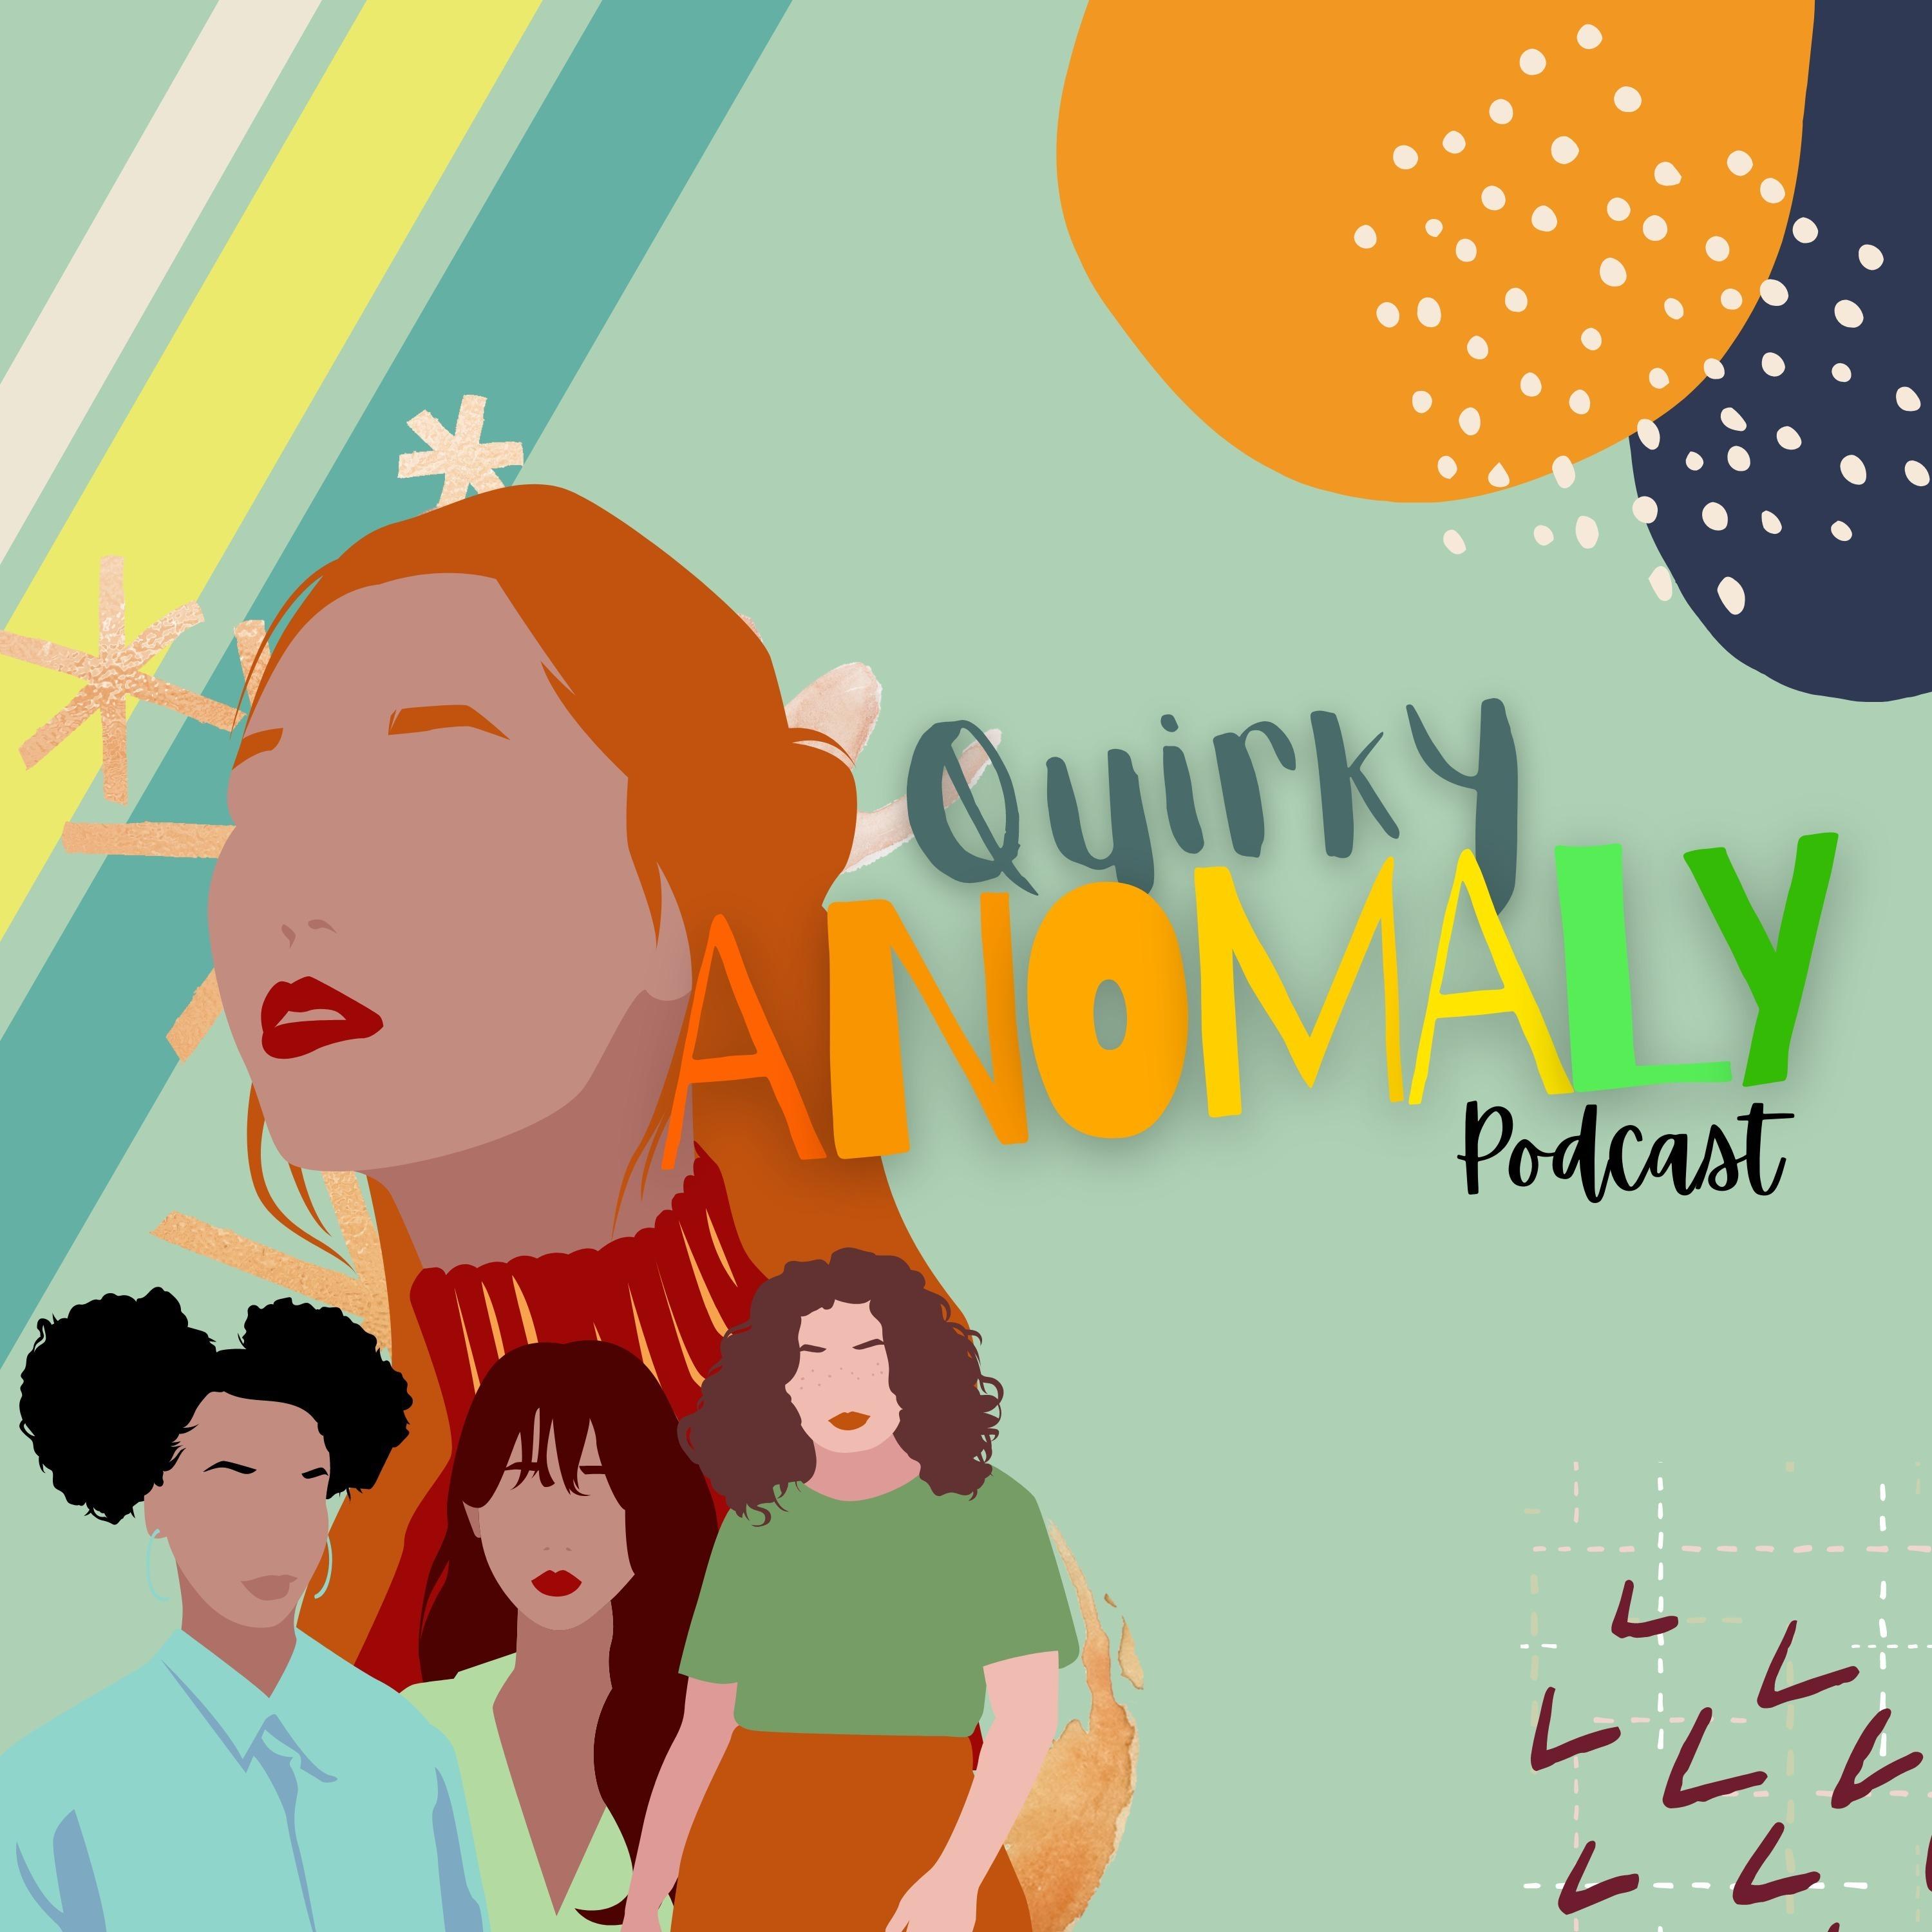 The Quirky Anomaly Podcast